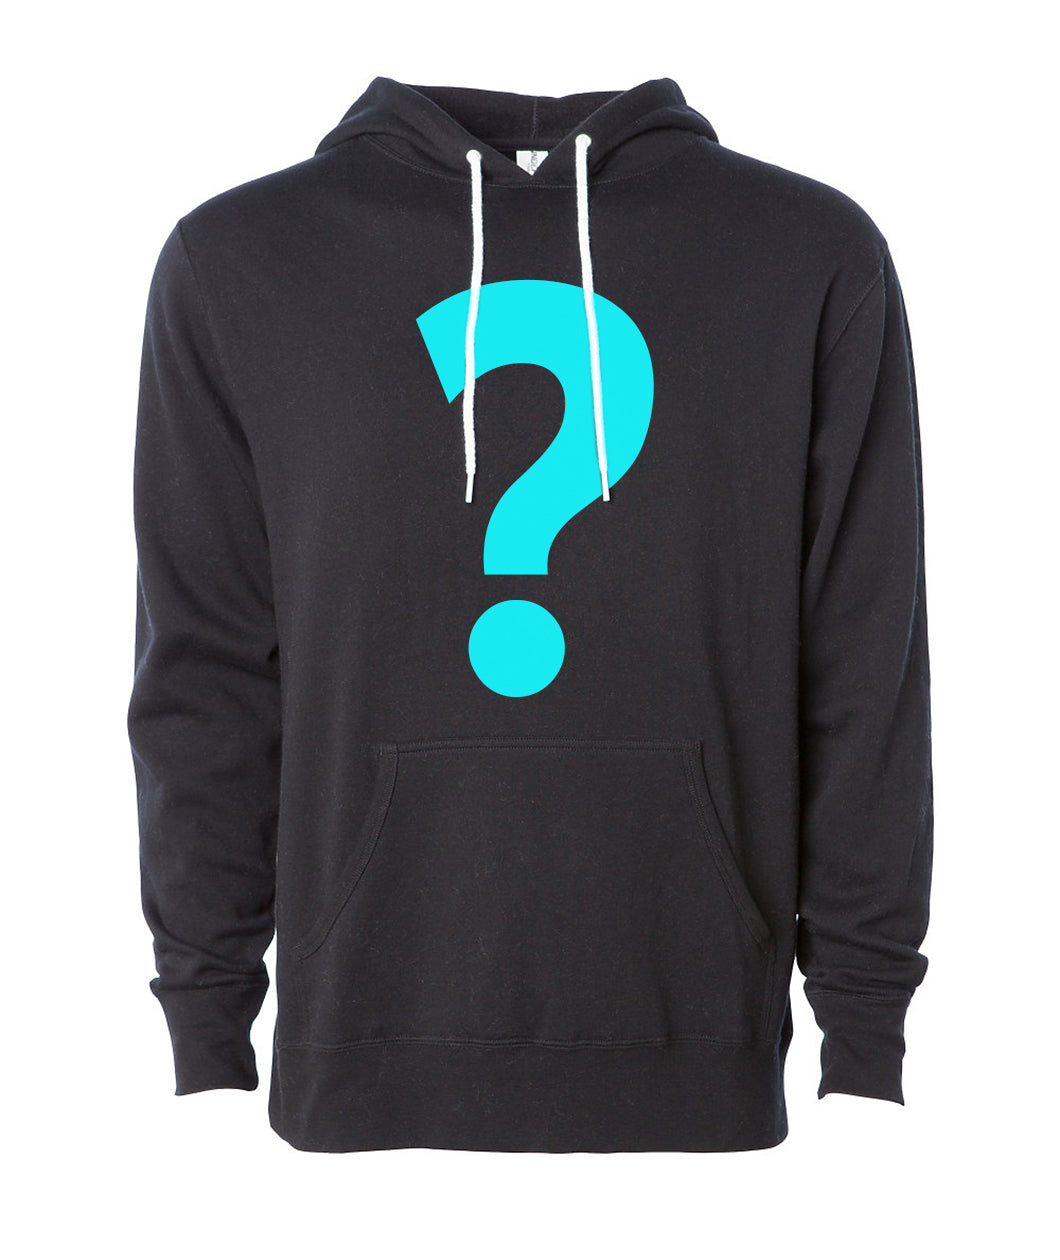 Black hoodie with white laces and light blue question mark in center of design - from DFTBA Records